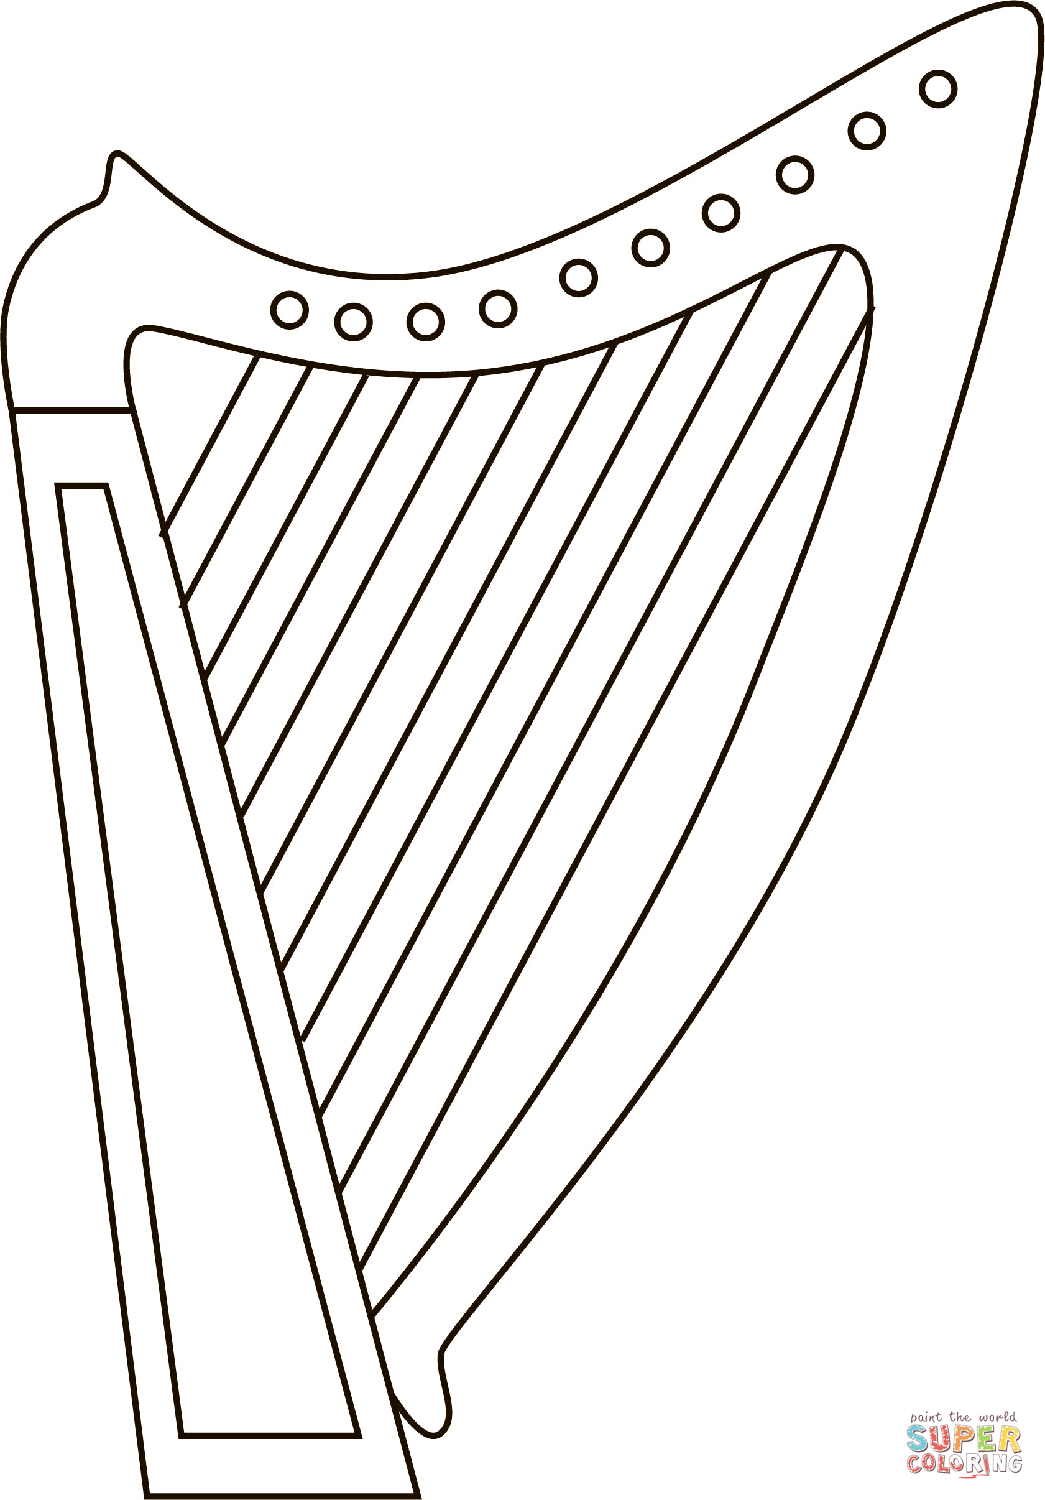 Celtic harp coloring page free printable coloring pages